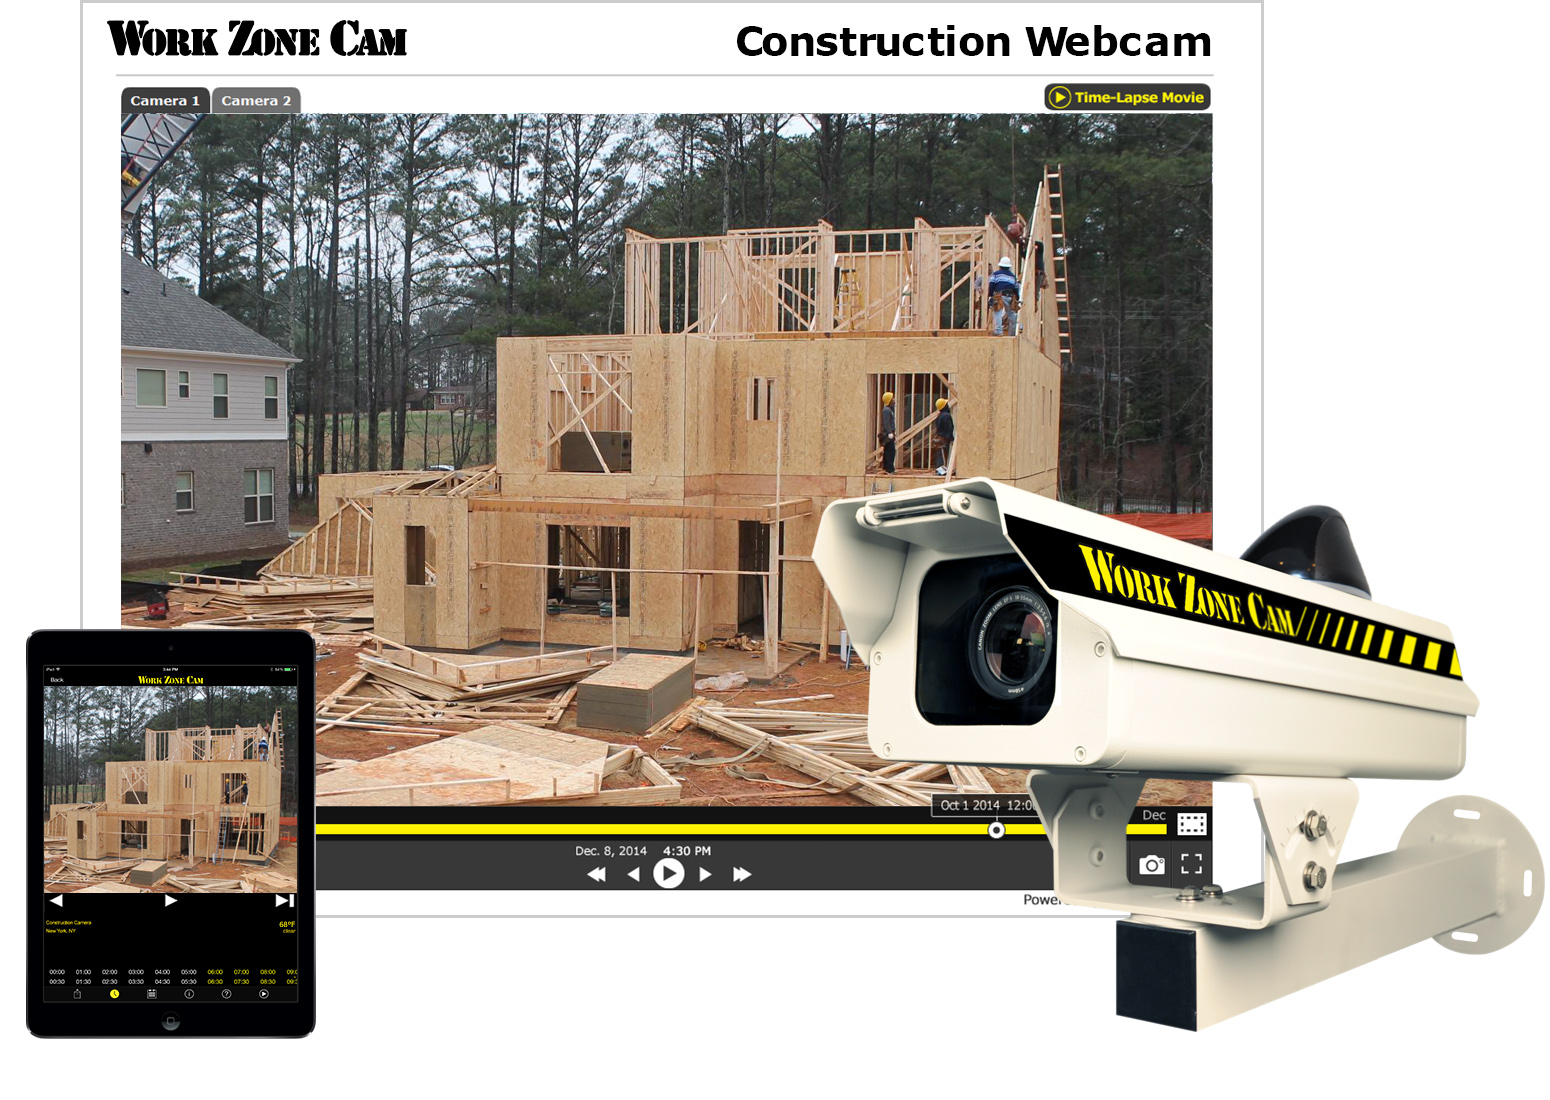 Work Zone Cam to Debut 18MP Construction Webcam at World of Concrete